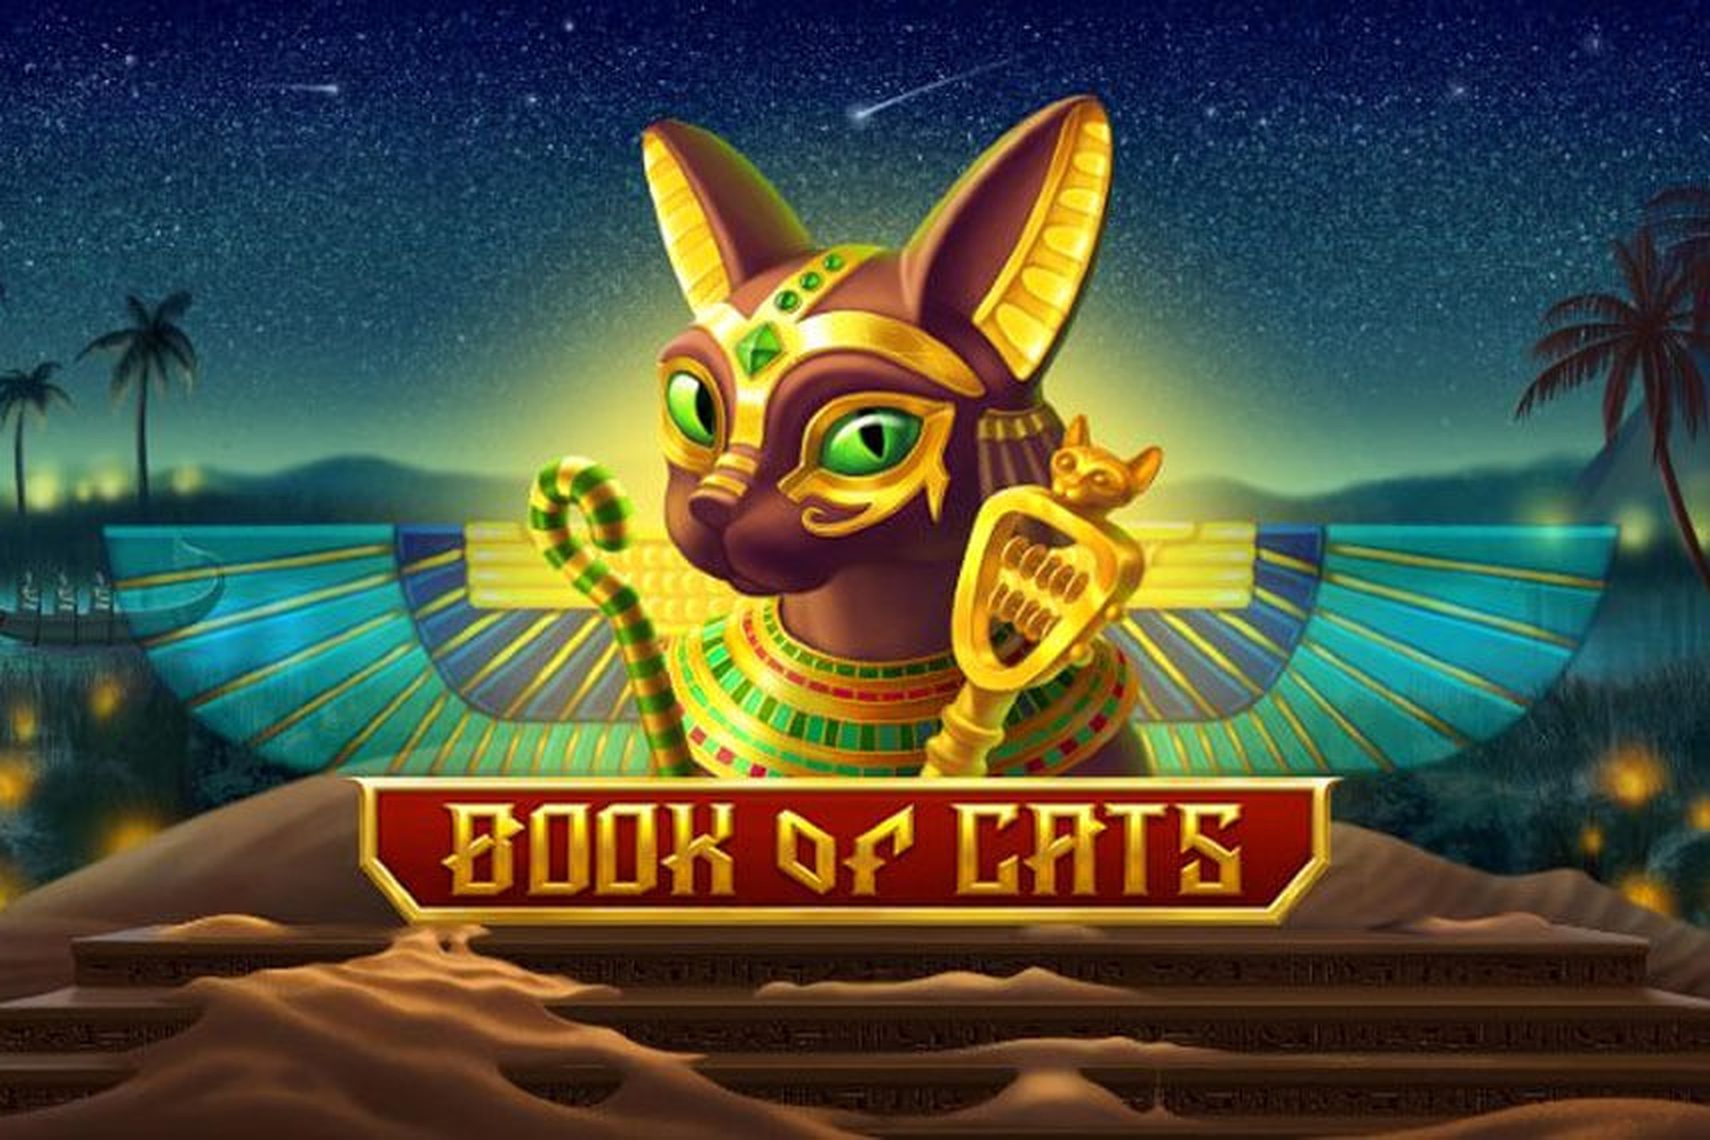 Book Of Cats demo